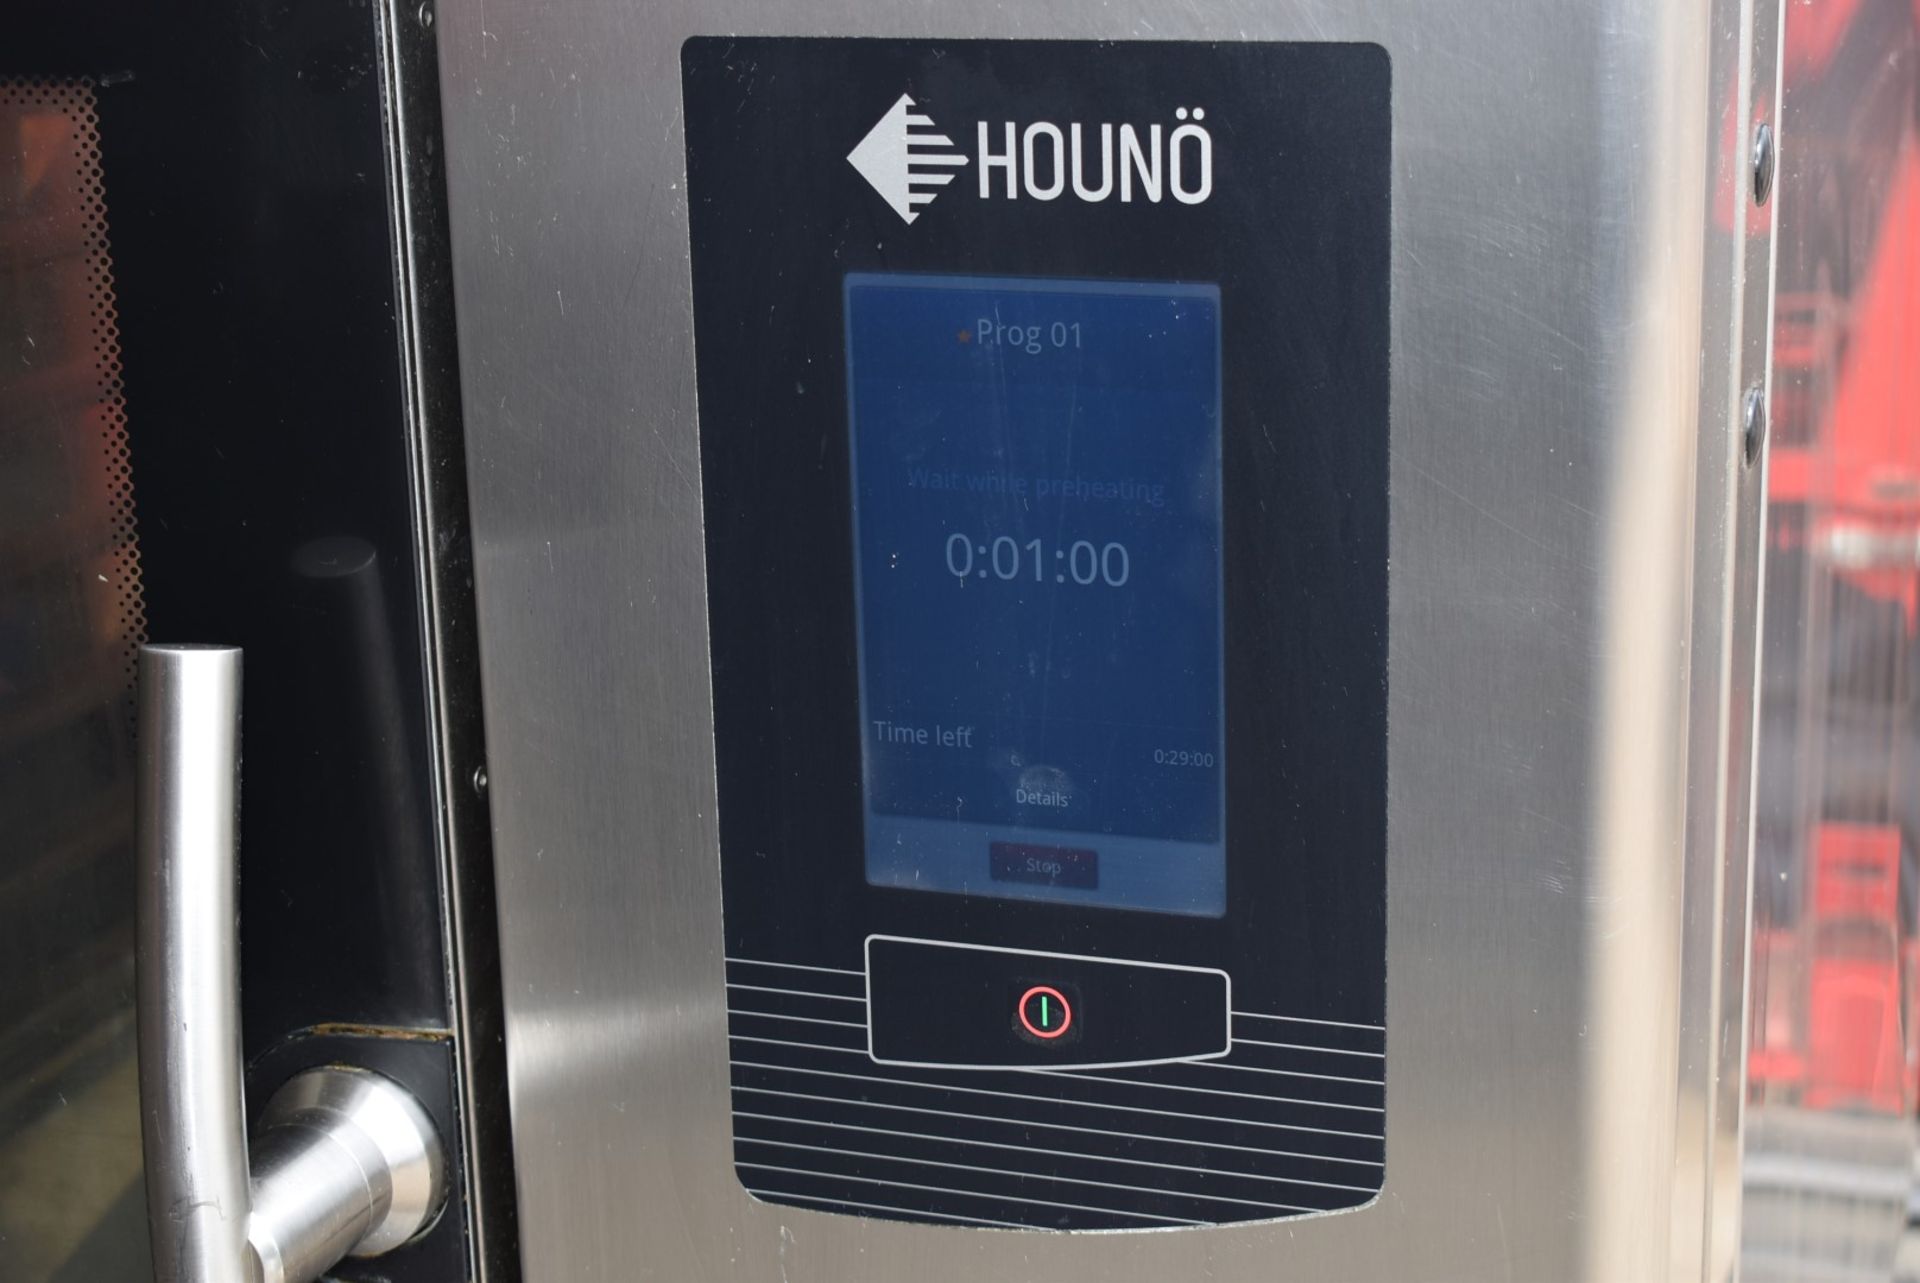 1 x Houno 6 Grid Electric Passthrough Door Combi Oven - 3 Phase With Pre-Set Cooking Options - Image 5 of 17